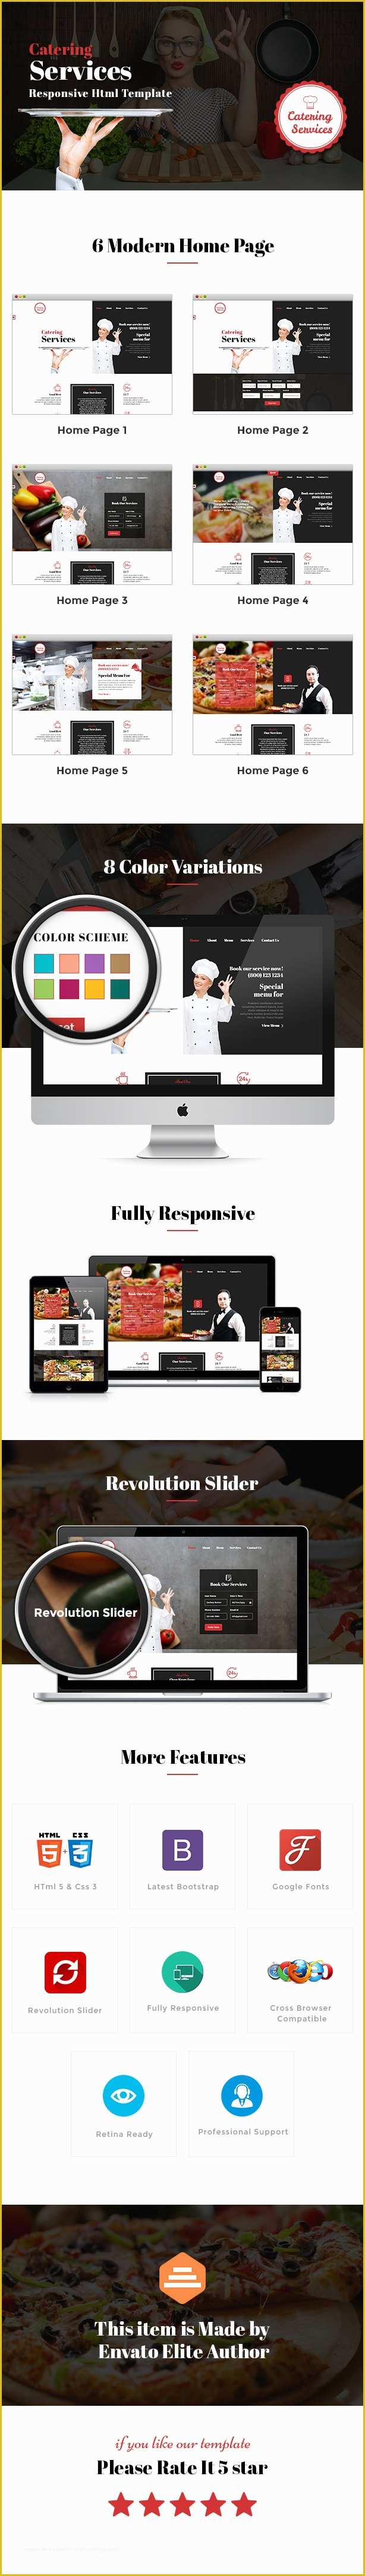 Chef Portfolio Template Free Of Catering Chef and Food Restaurant Template